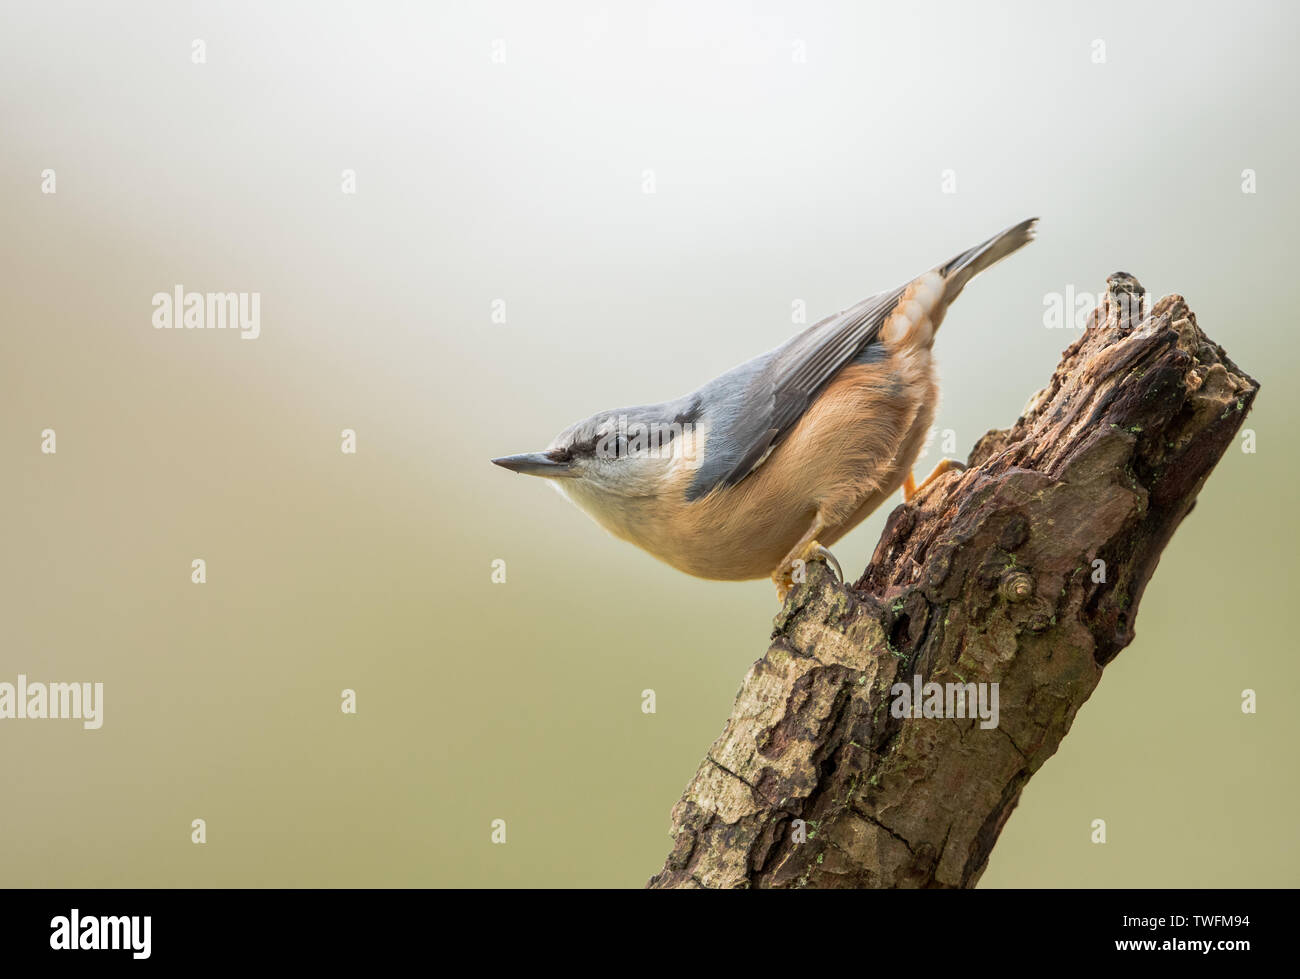 A European Nuthatch (Sitta europaea) on a log with a clean background, taken in Miserden, Gloucestershire Stock Photo